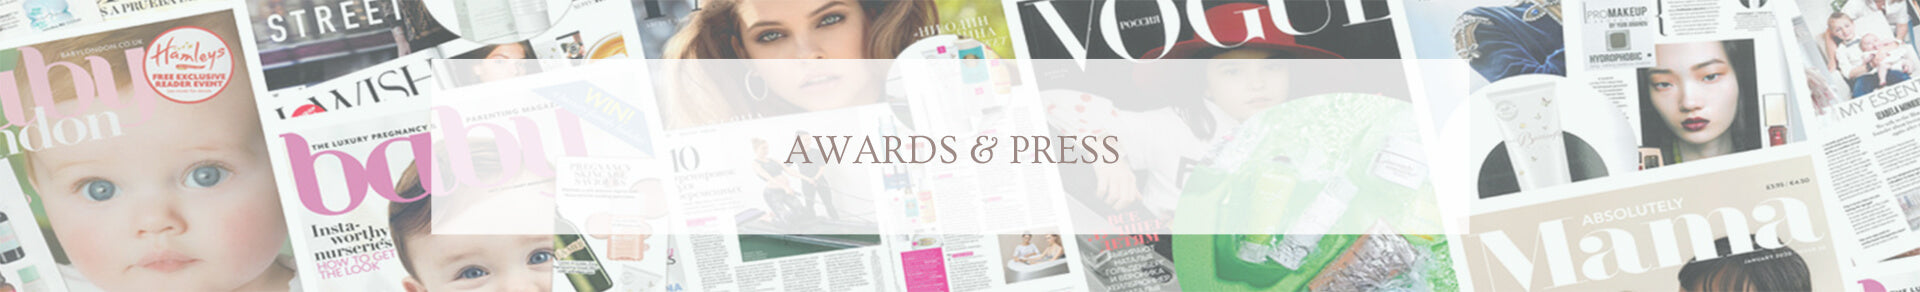 Awards and Press Collage